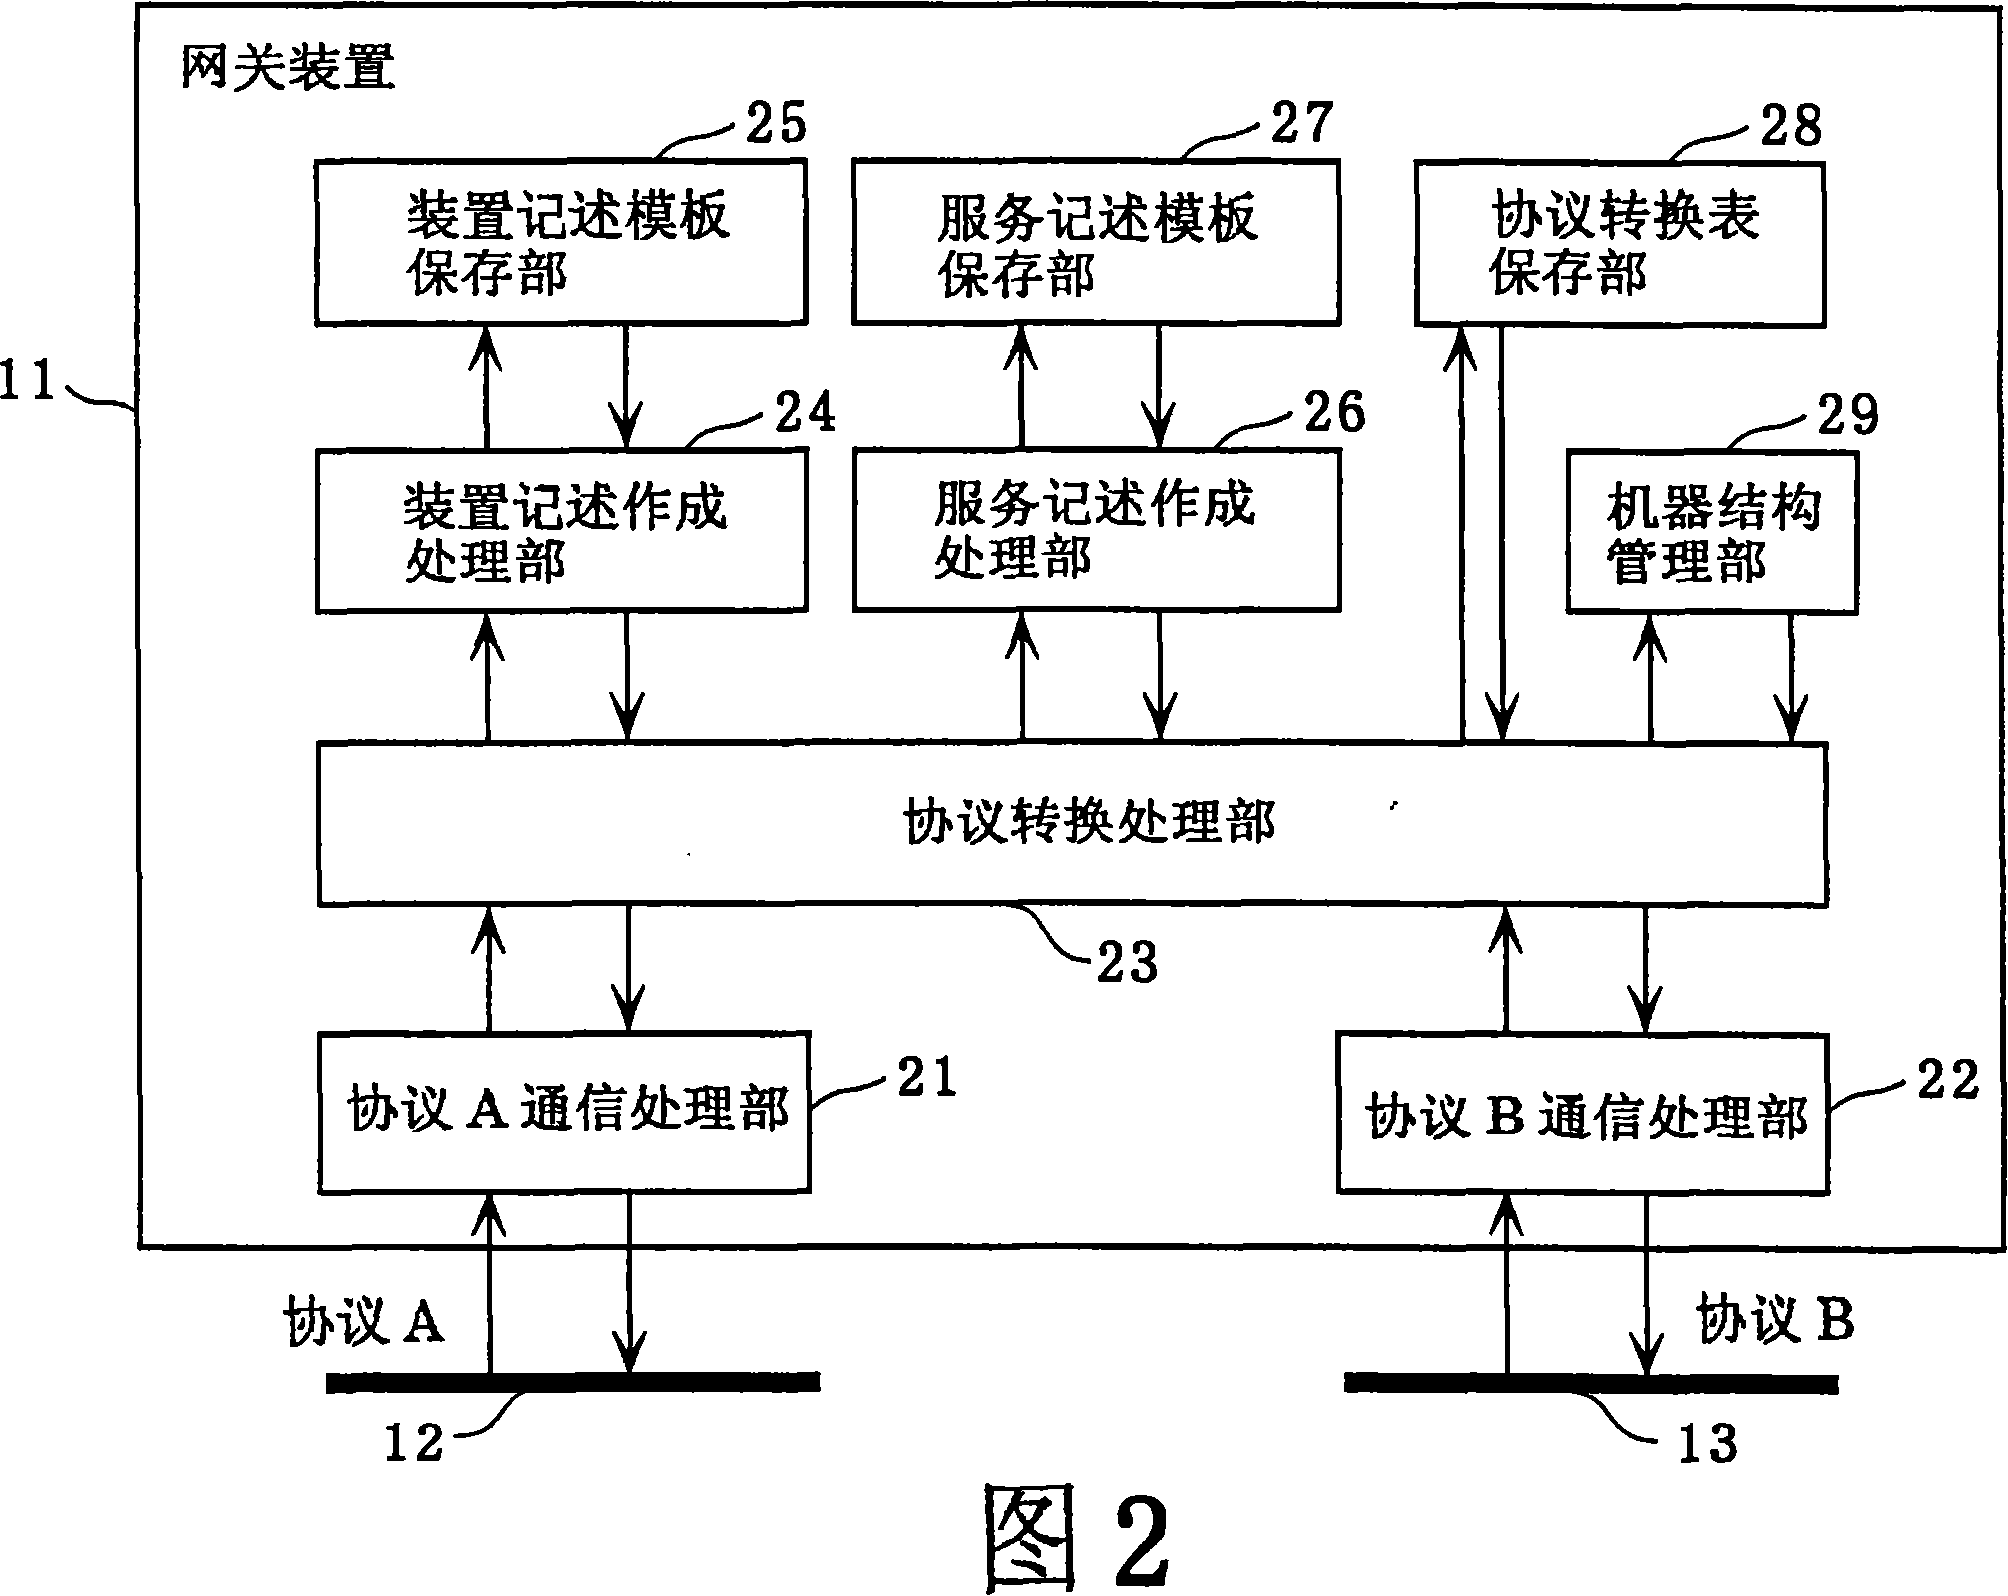 Gateway device and control device